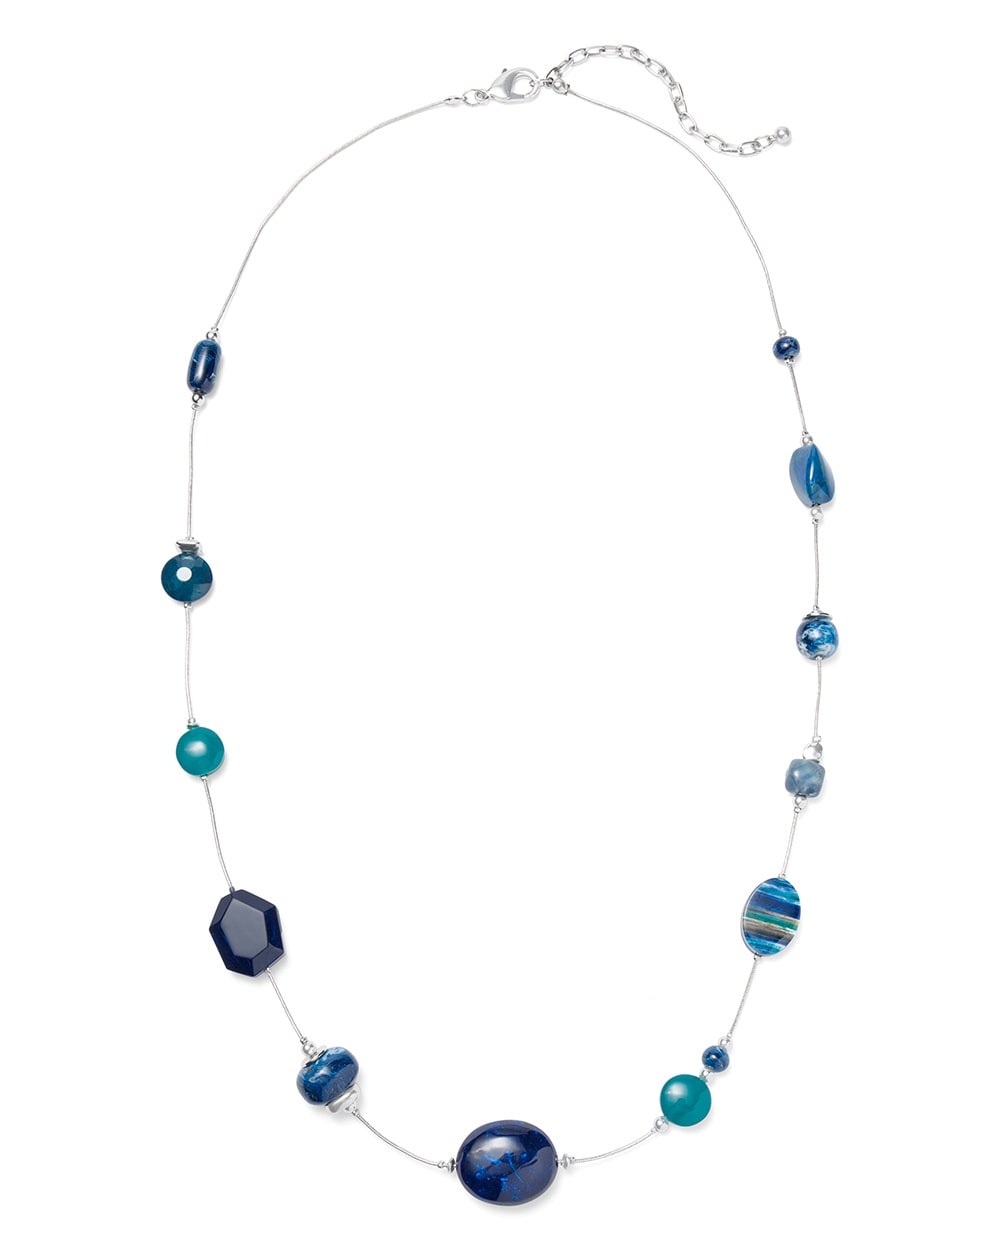 Teal & Navy Mix Long Necklace